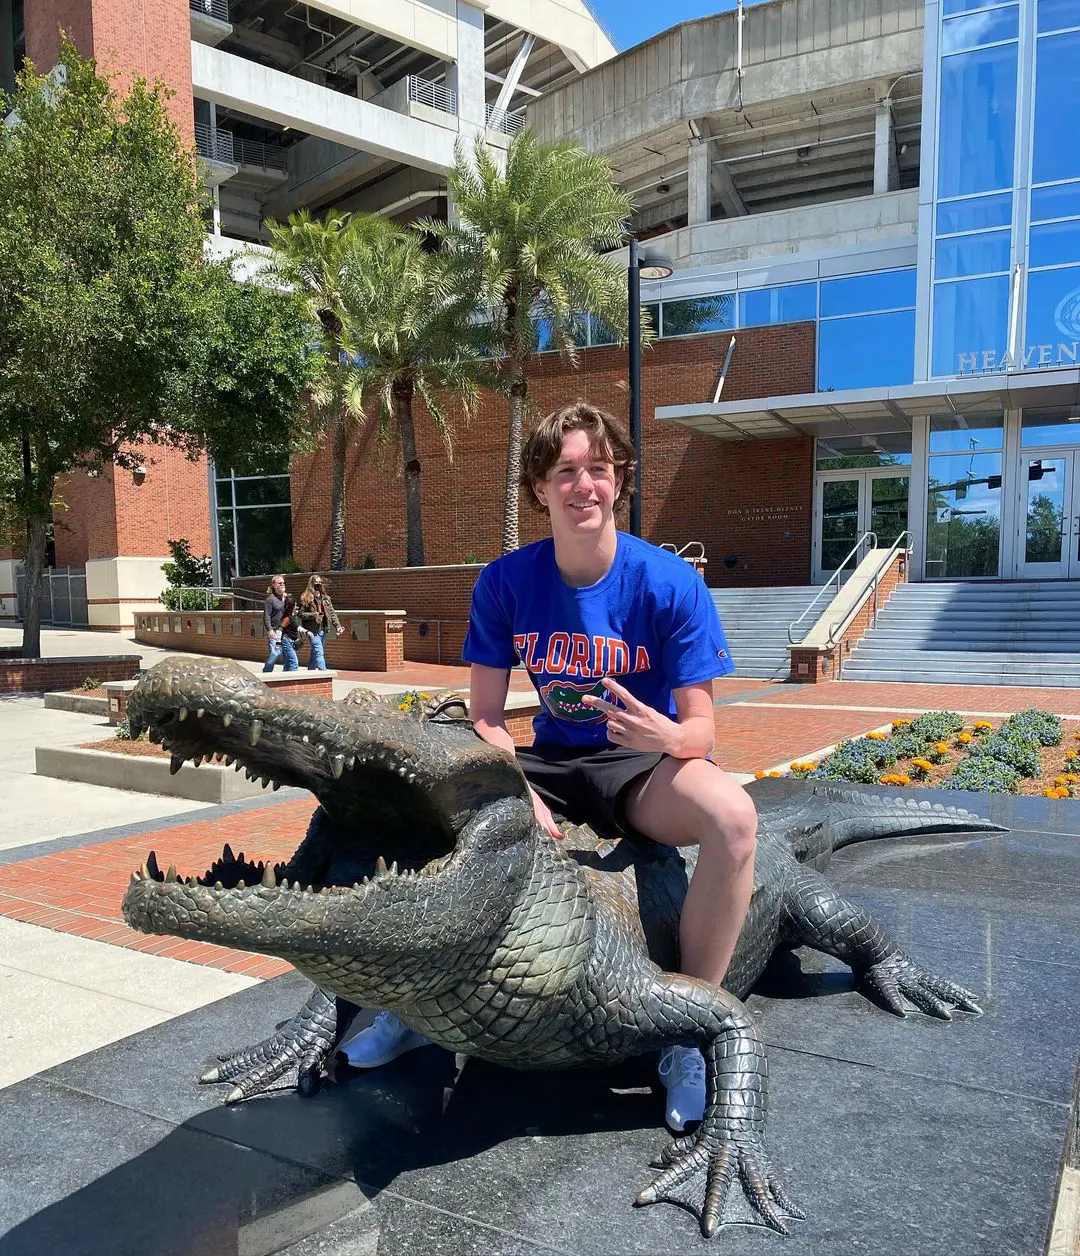 Jake competed for the Michigan Wolverines from 2020 to 2022 and decided to compete for the Florida Gators for the 2023 season.